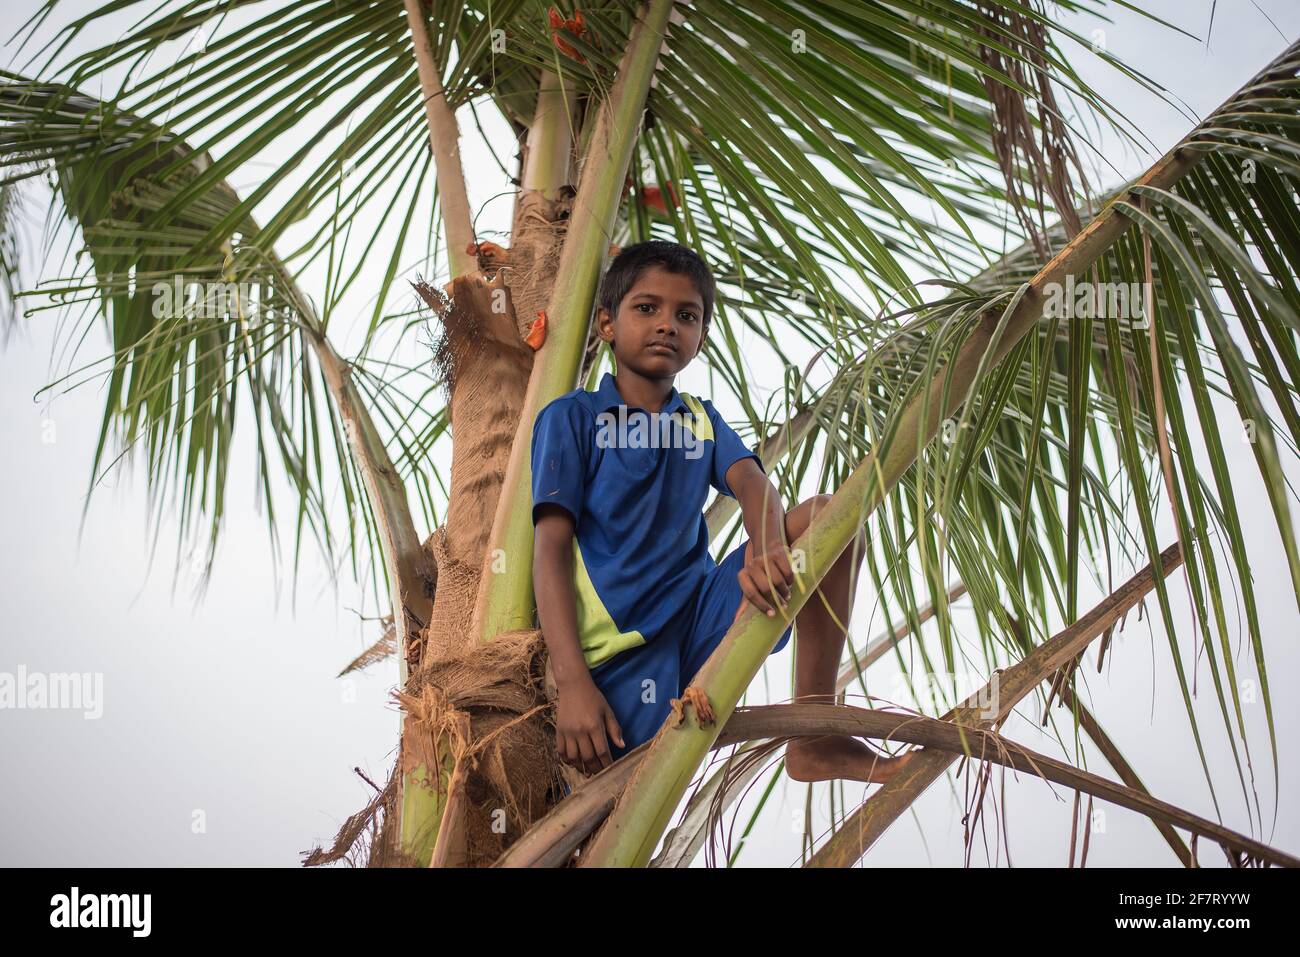 Varanasi, India. 10-14-2019. Portrait of a boy climbing at a coconut tree in the school premises after having lunch with all school mates in India. Stock Photo